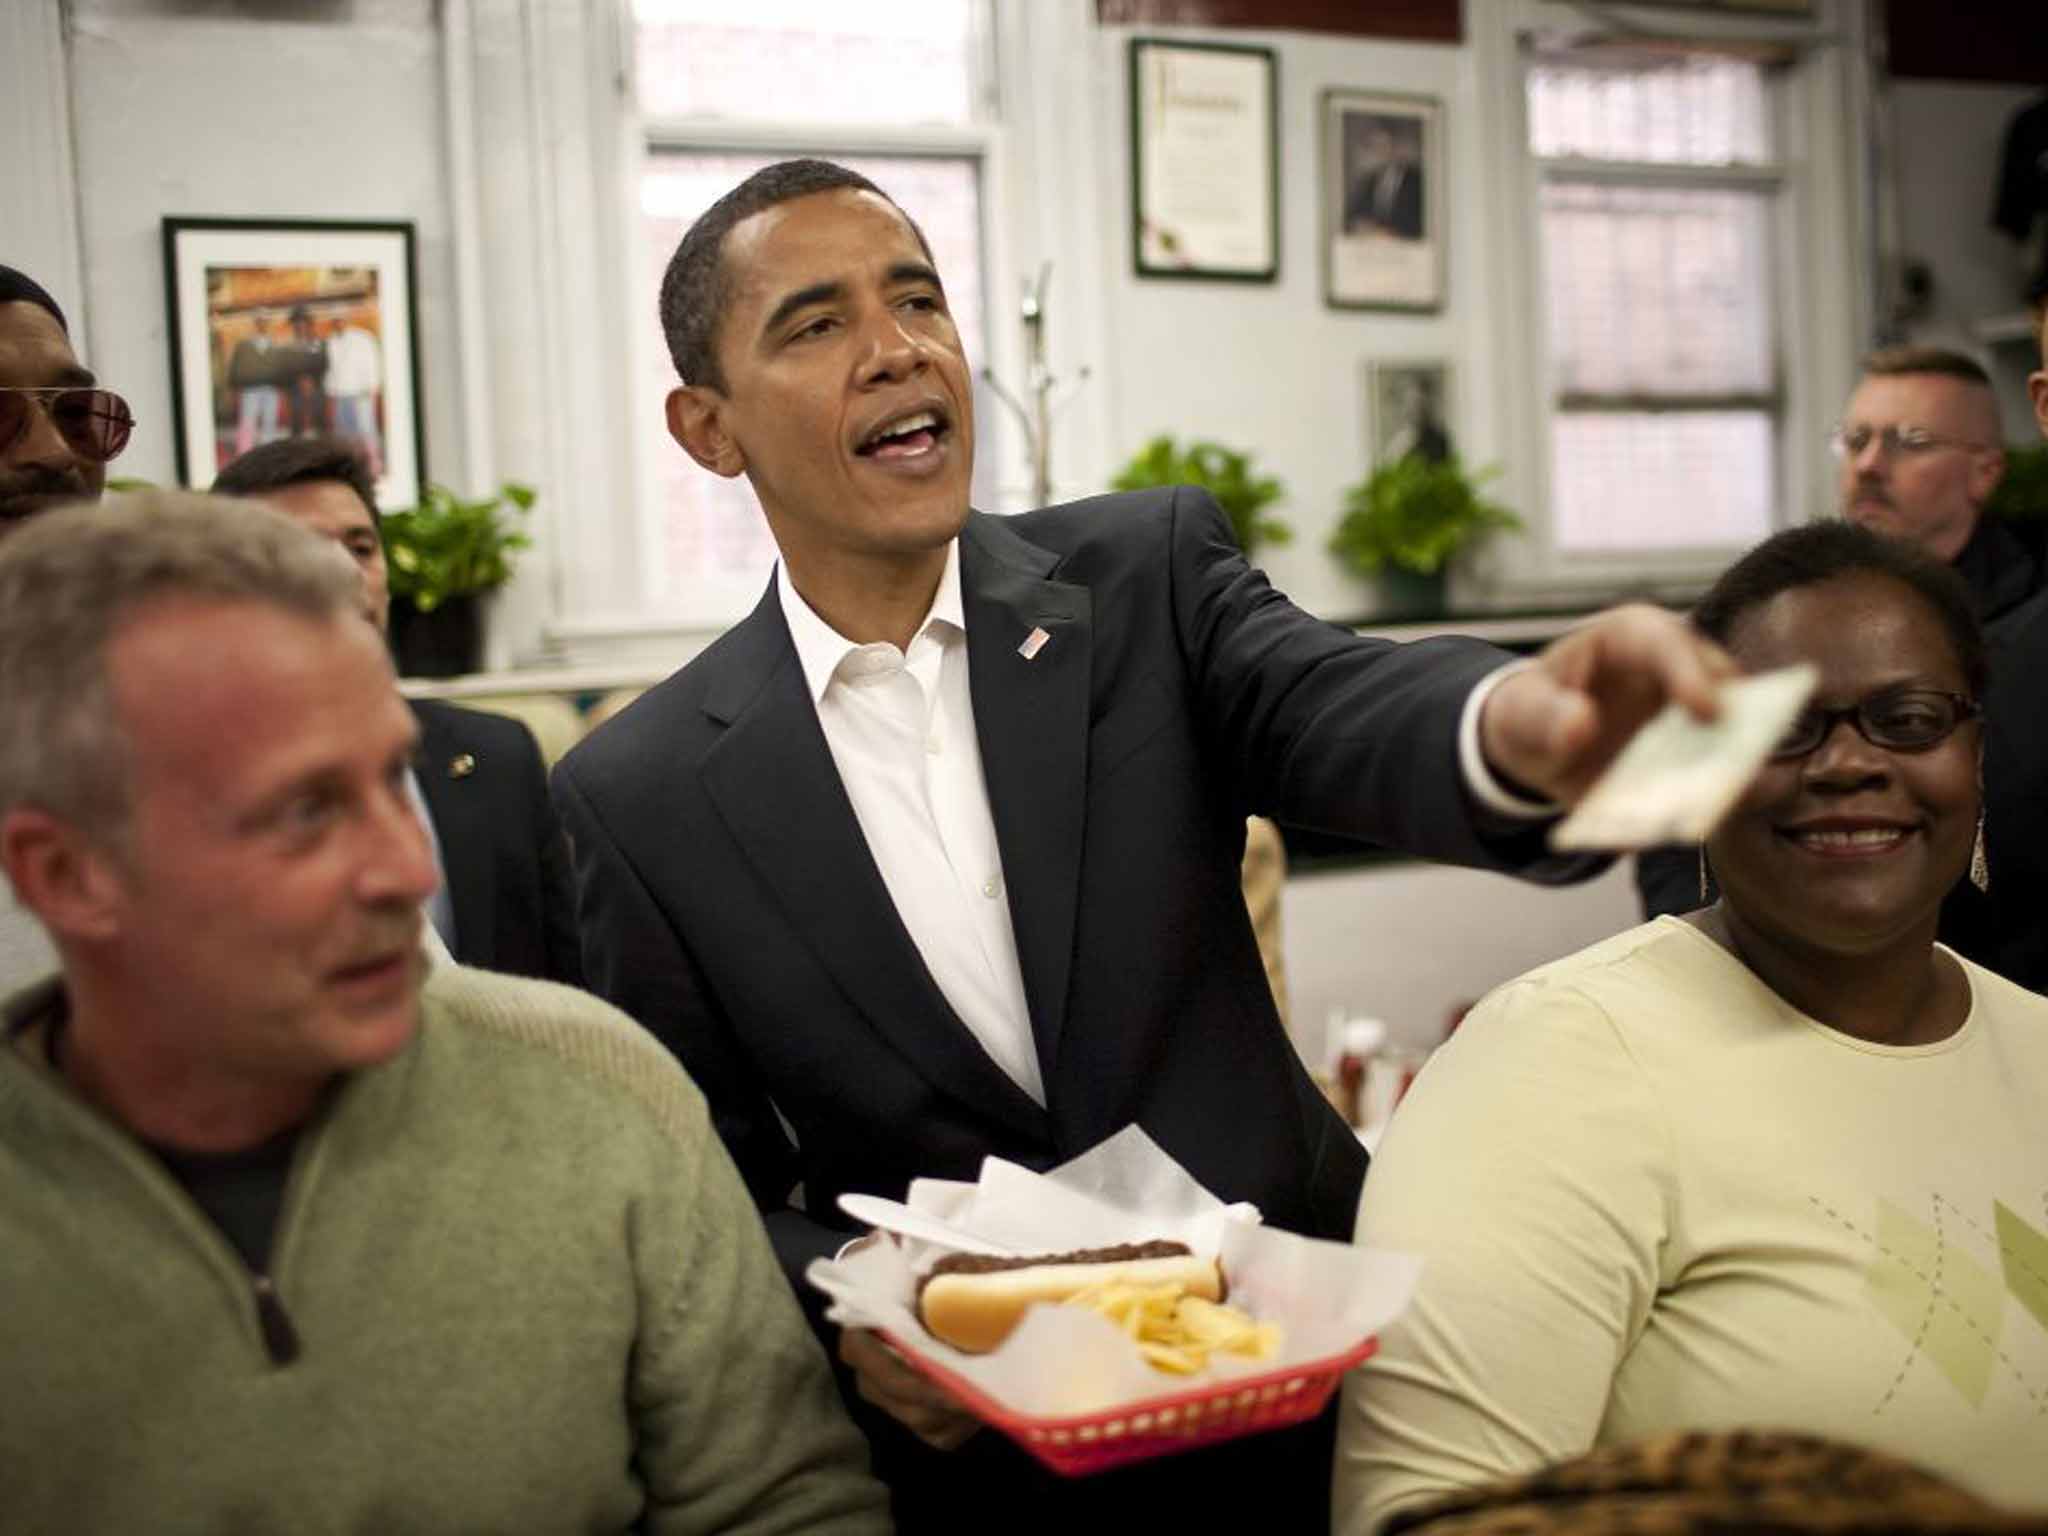 Obama paying for his meal at Ben's in 2009